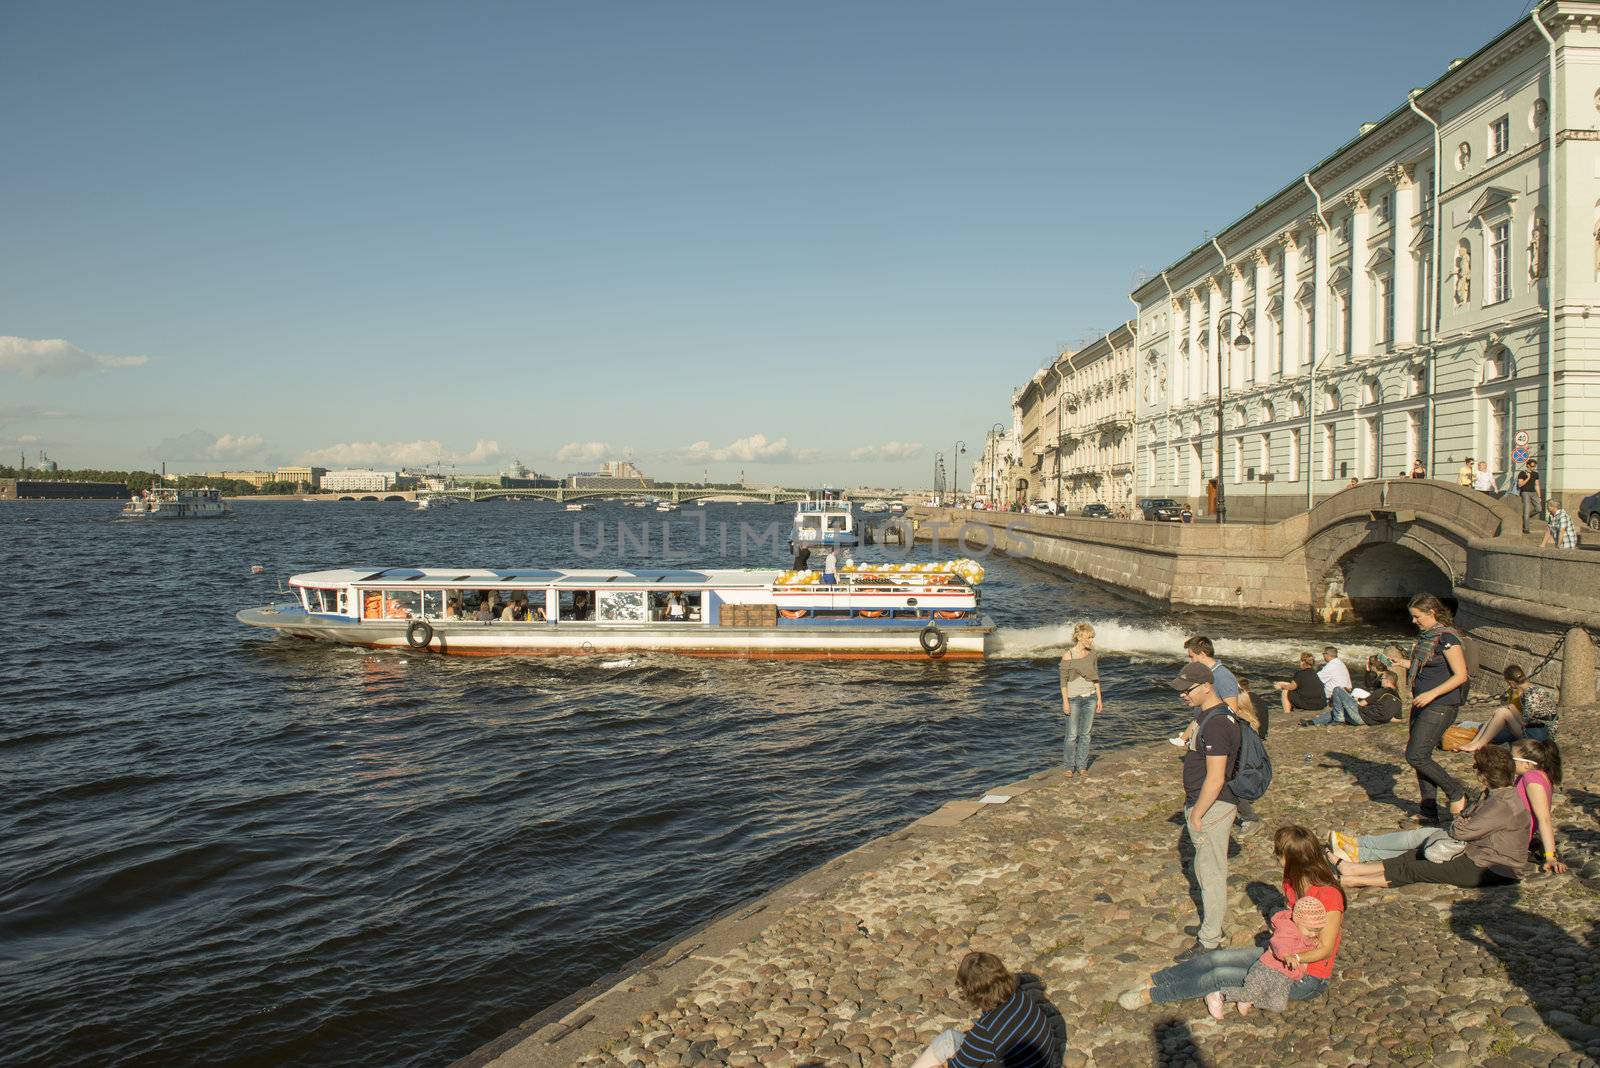 The boats on the Neva river in Sank Petersburg, Russia. Taken on September 2012.